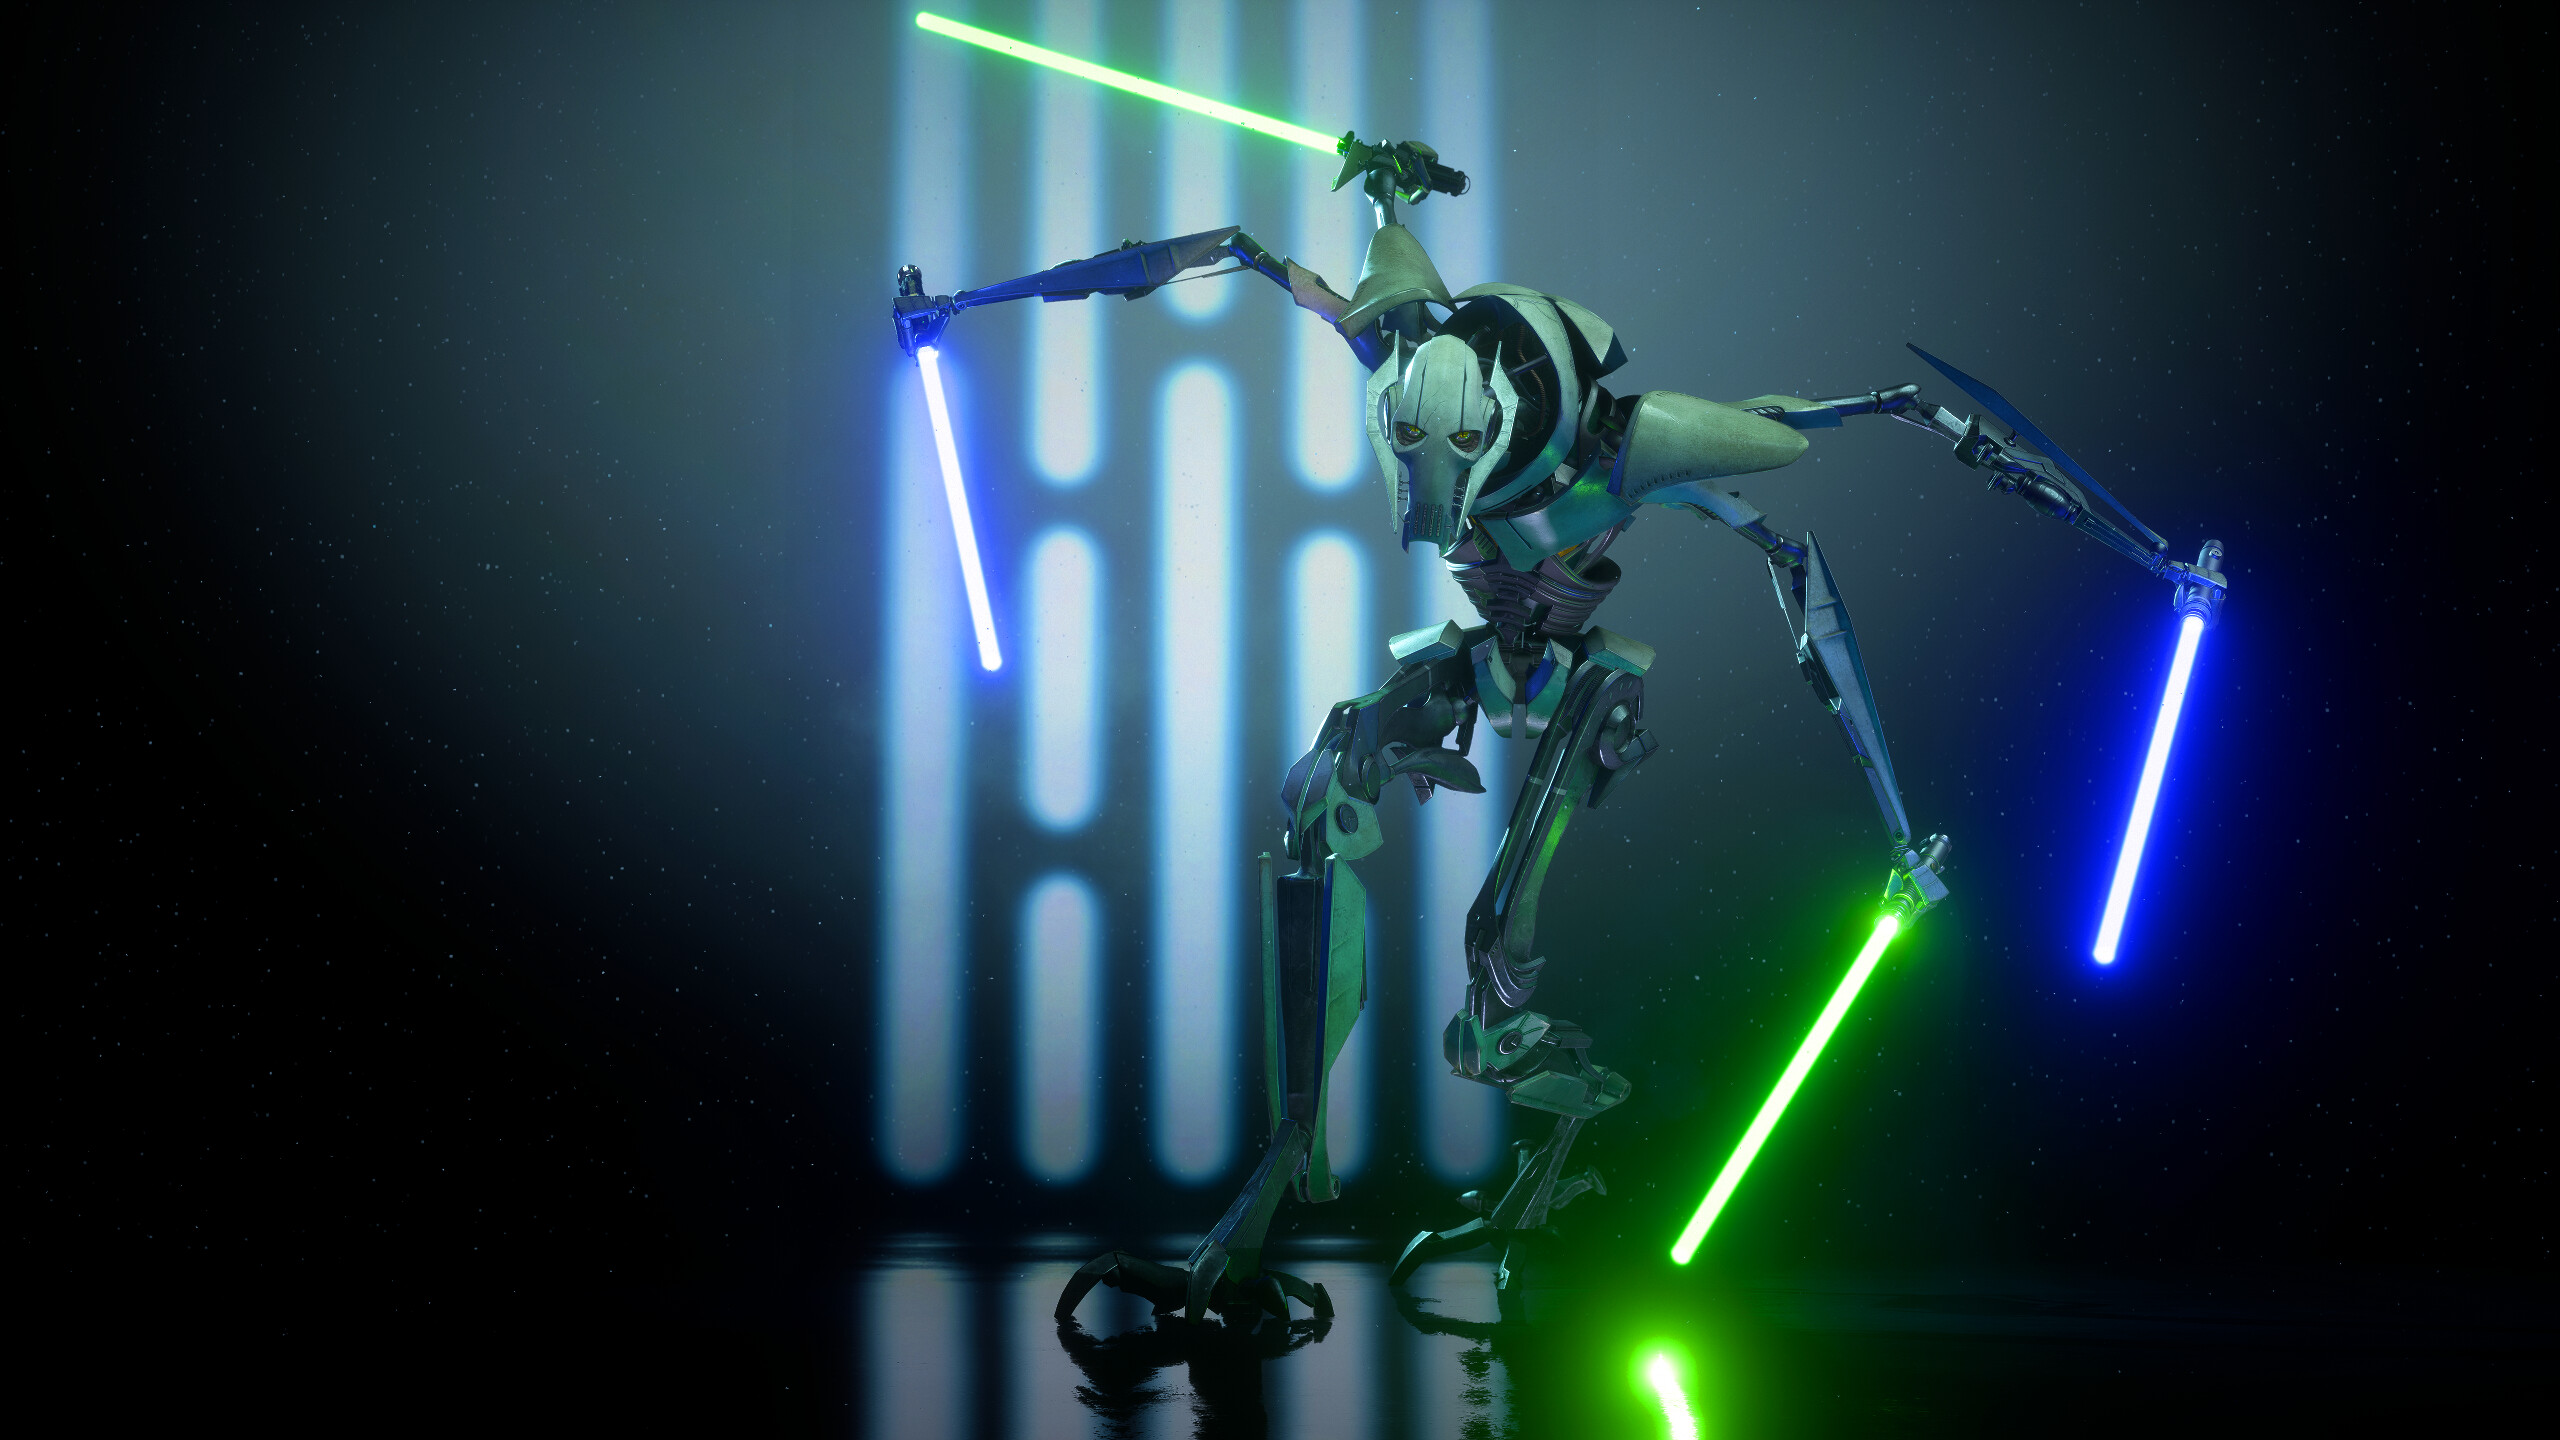 General Grievous: Star Wars Battlefront 2, The great General of The Clone Wars, Extensive cybernetic enhancements, Lightsabers. 2560x1440 HD Background.